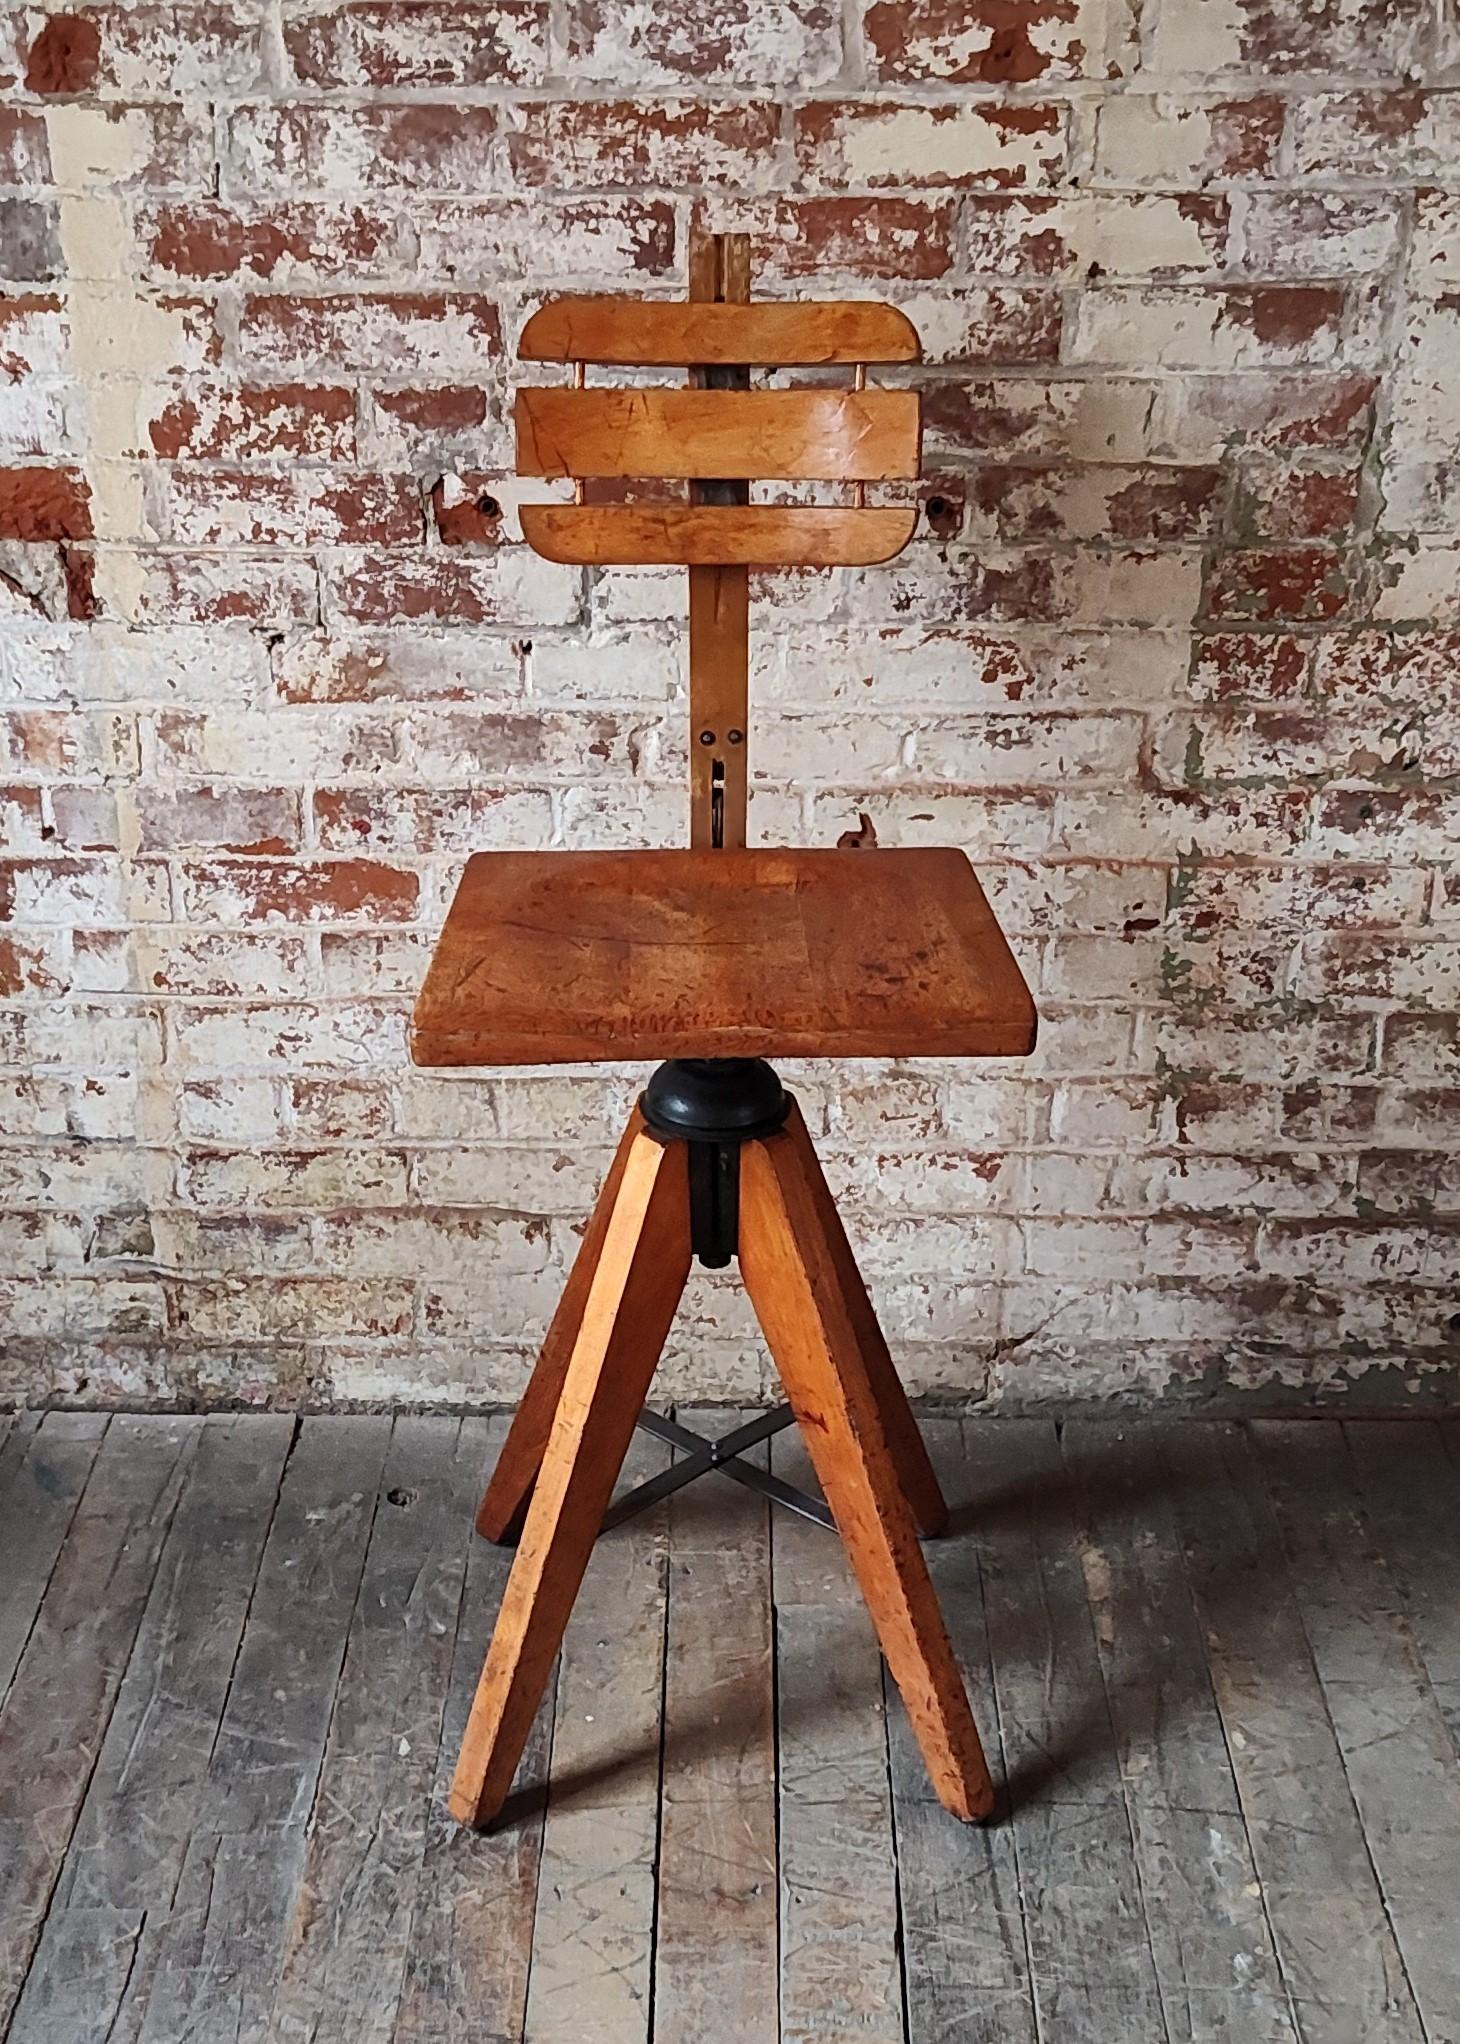 Antique Drafting Stool by Cook of Cambridge, MA

Base Dimensions: 17